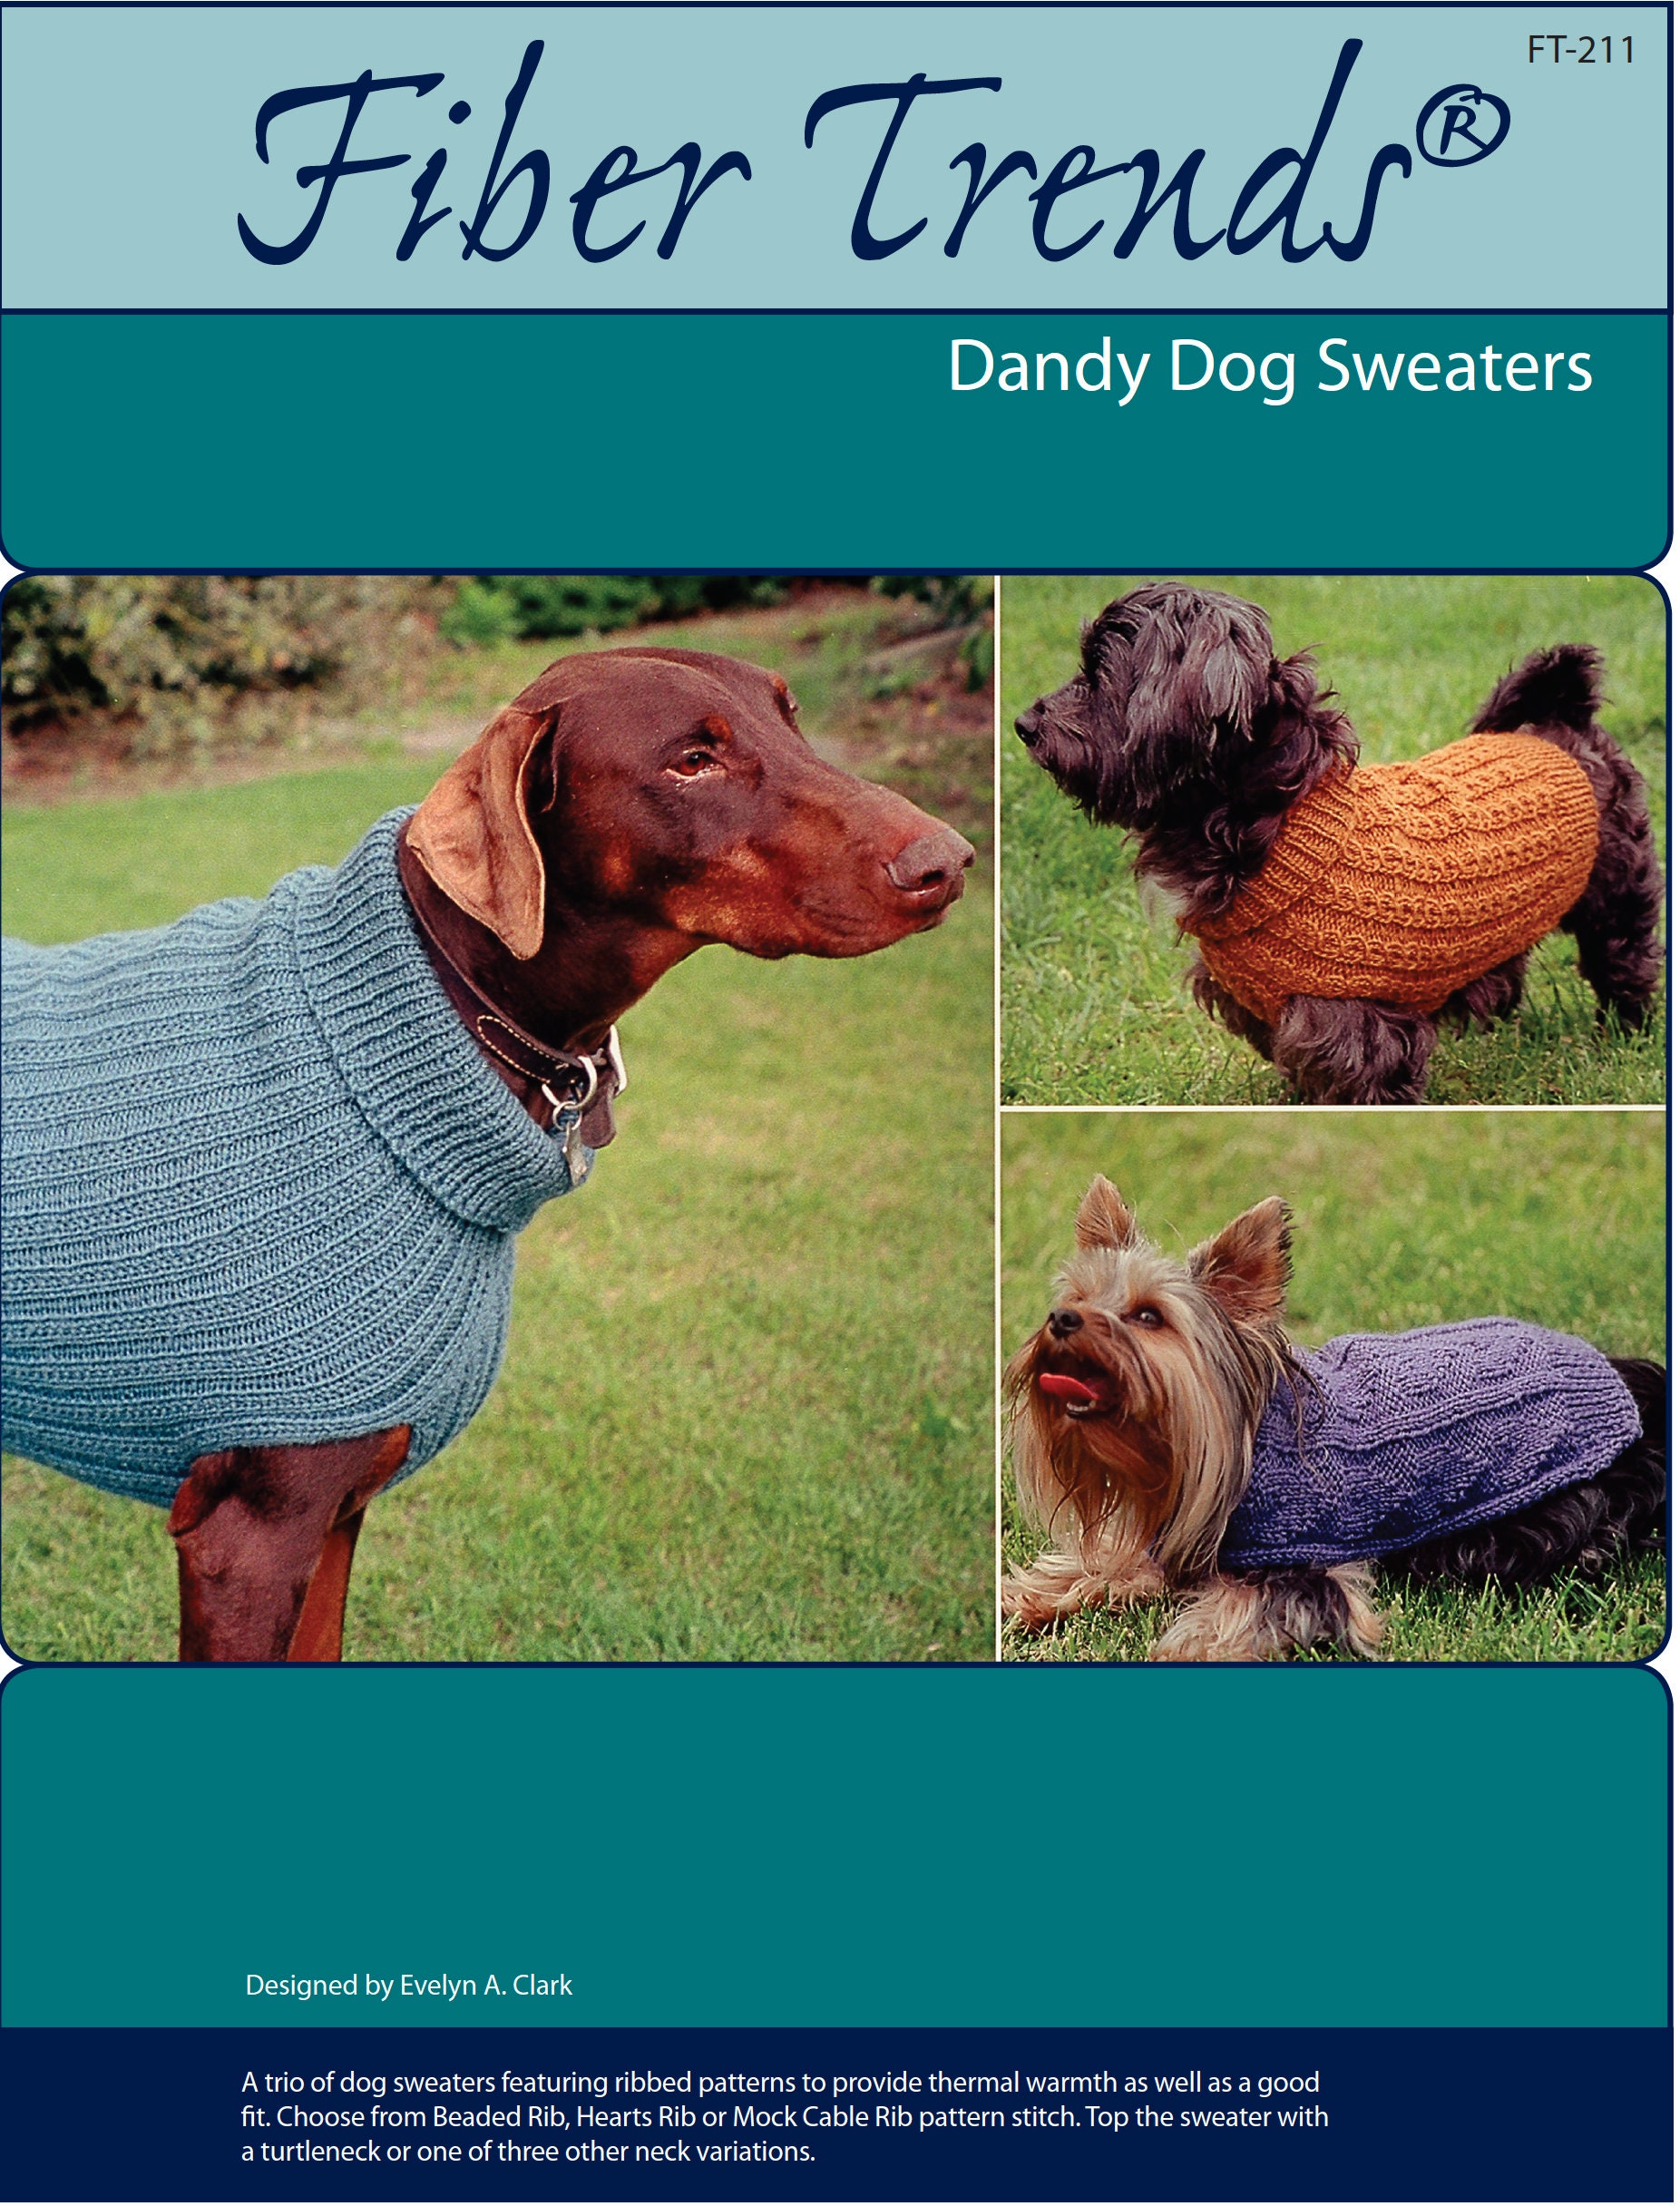 Dandy Dog Sweaters (FT211) pattern by Evelyn A. Clark